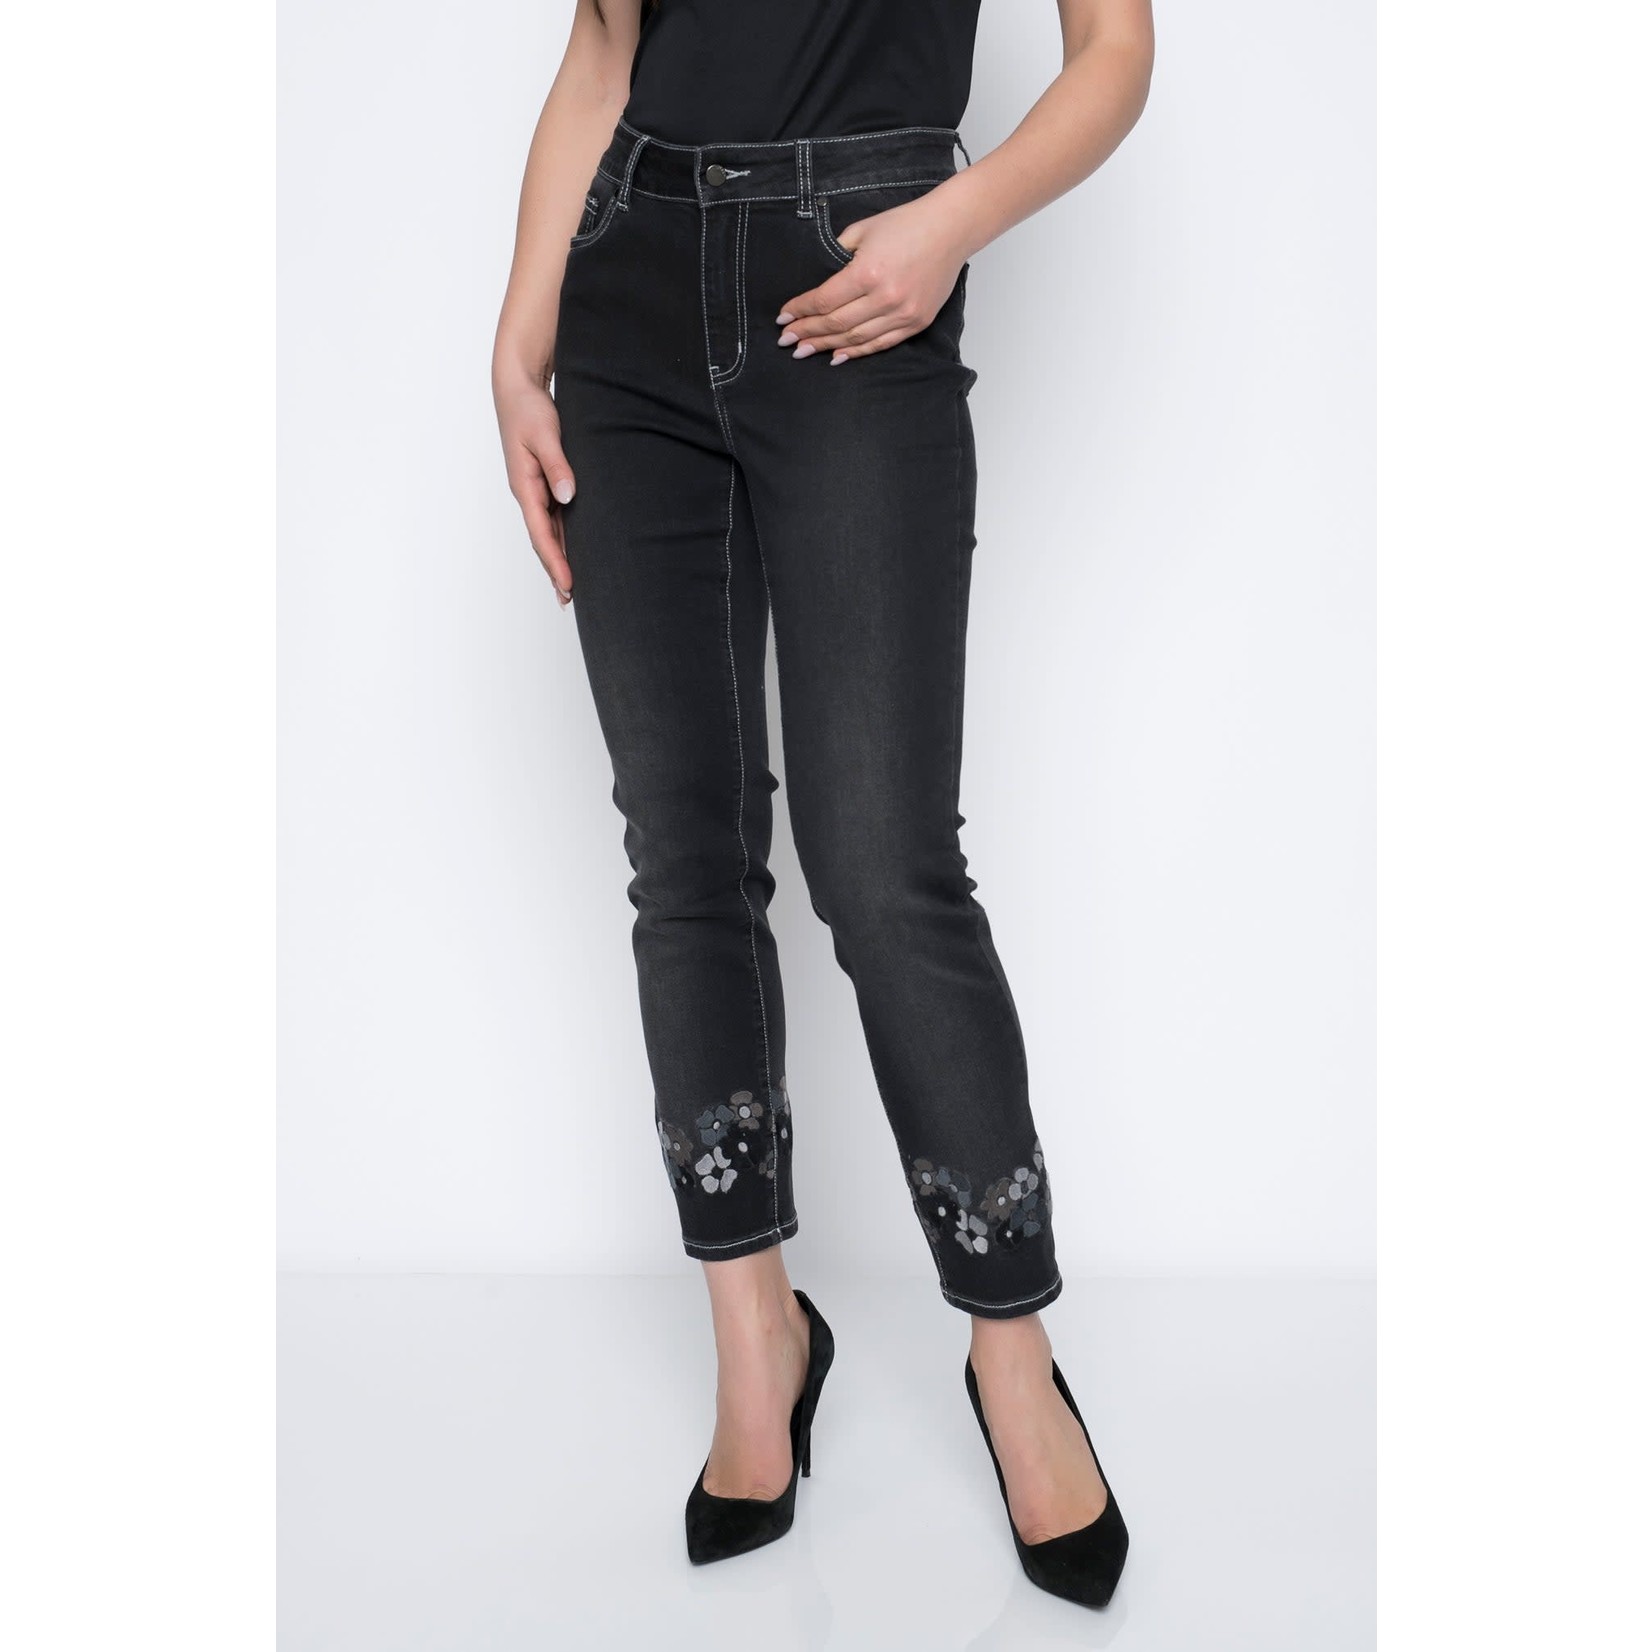 Picadilly Floral Embr Denim Pant in Charcoal